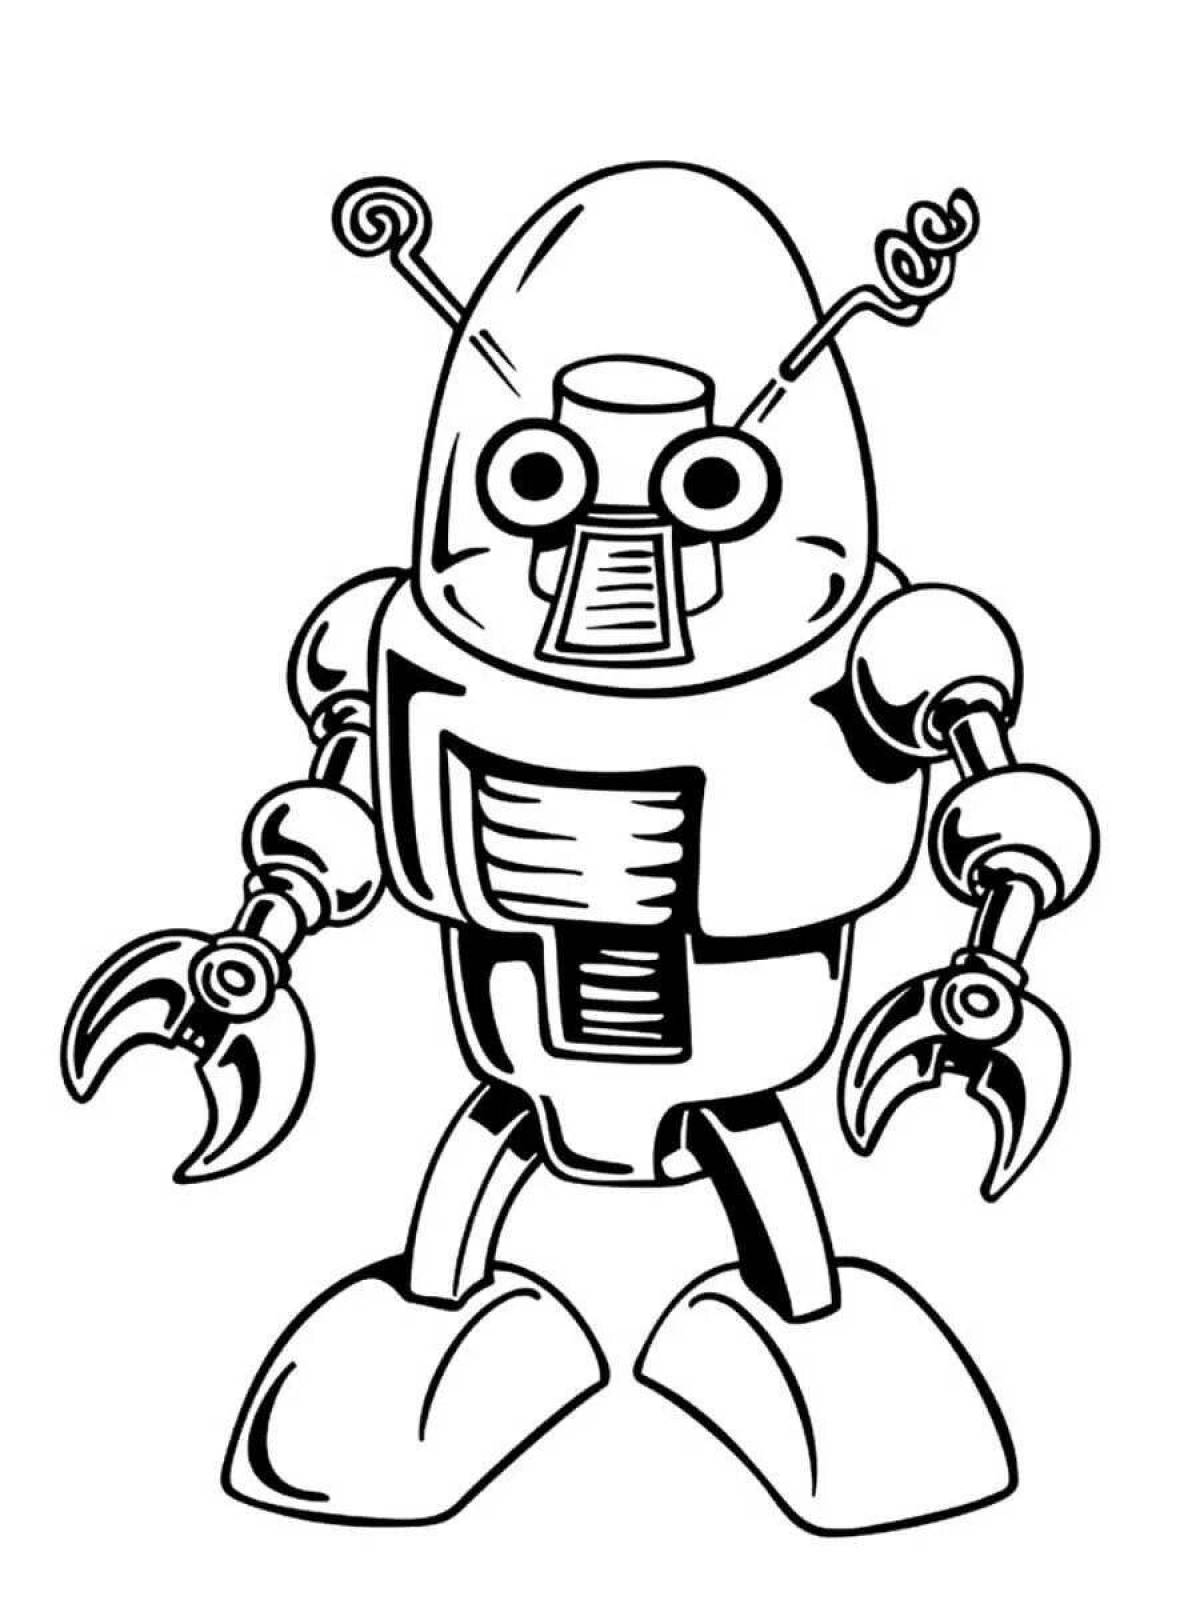 Funny coloring drawing of a robot